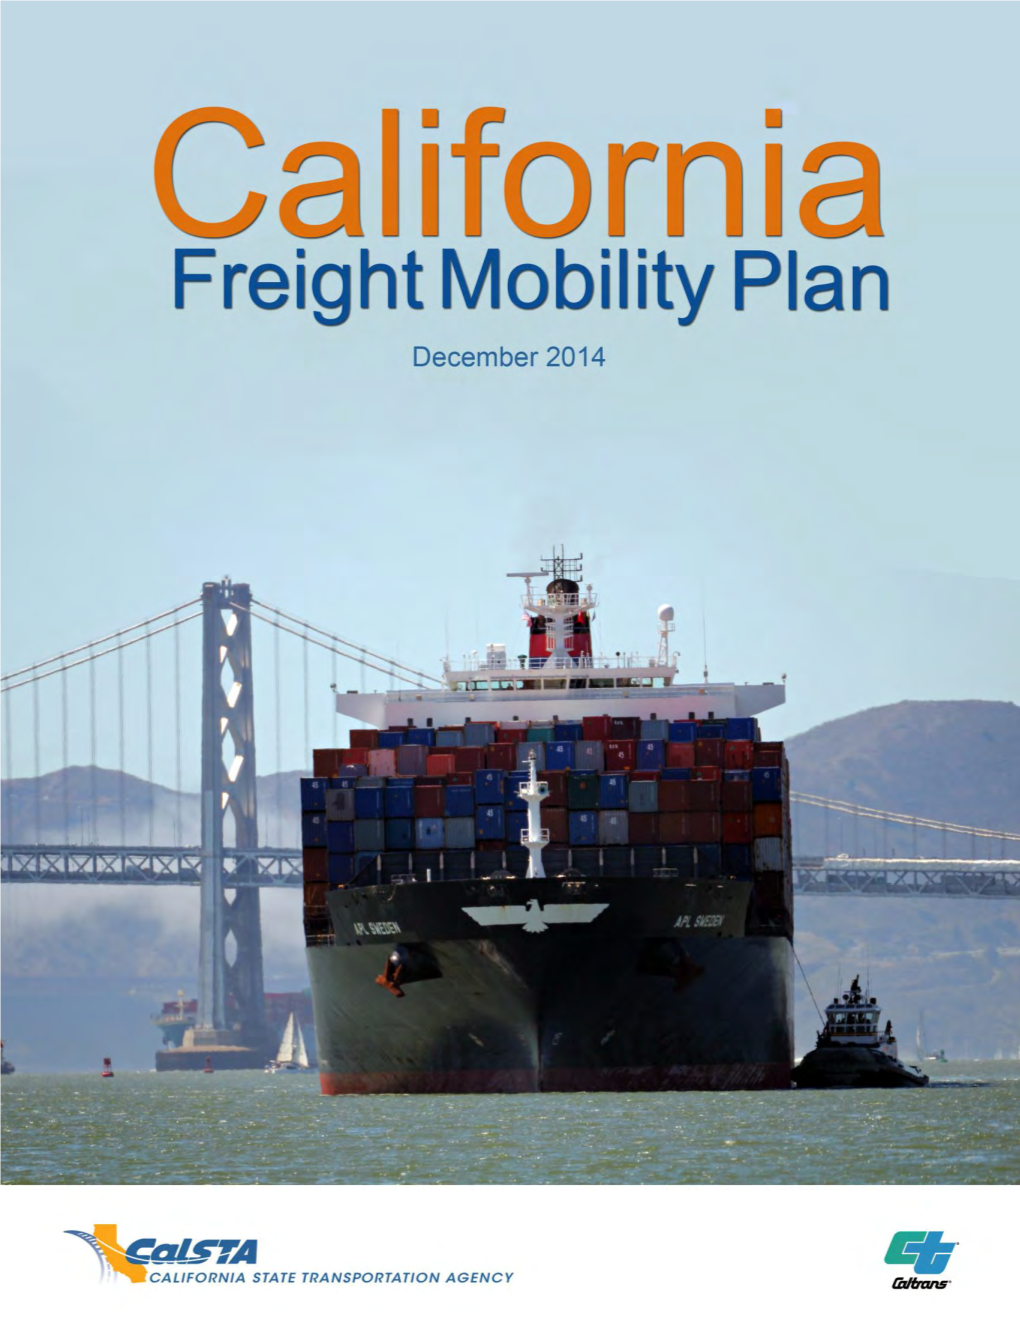 California Freight Mobility Plan Improvements, and Energy Transition Programs at Regional and State Levels